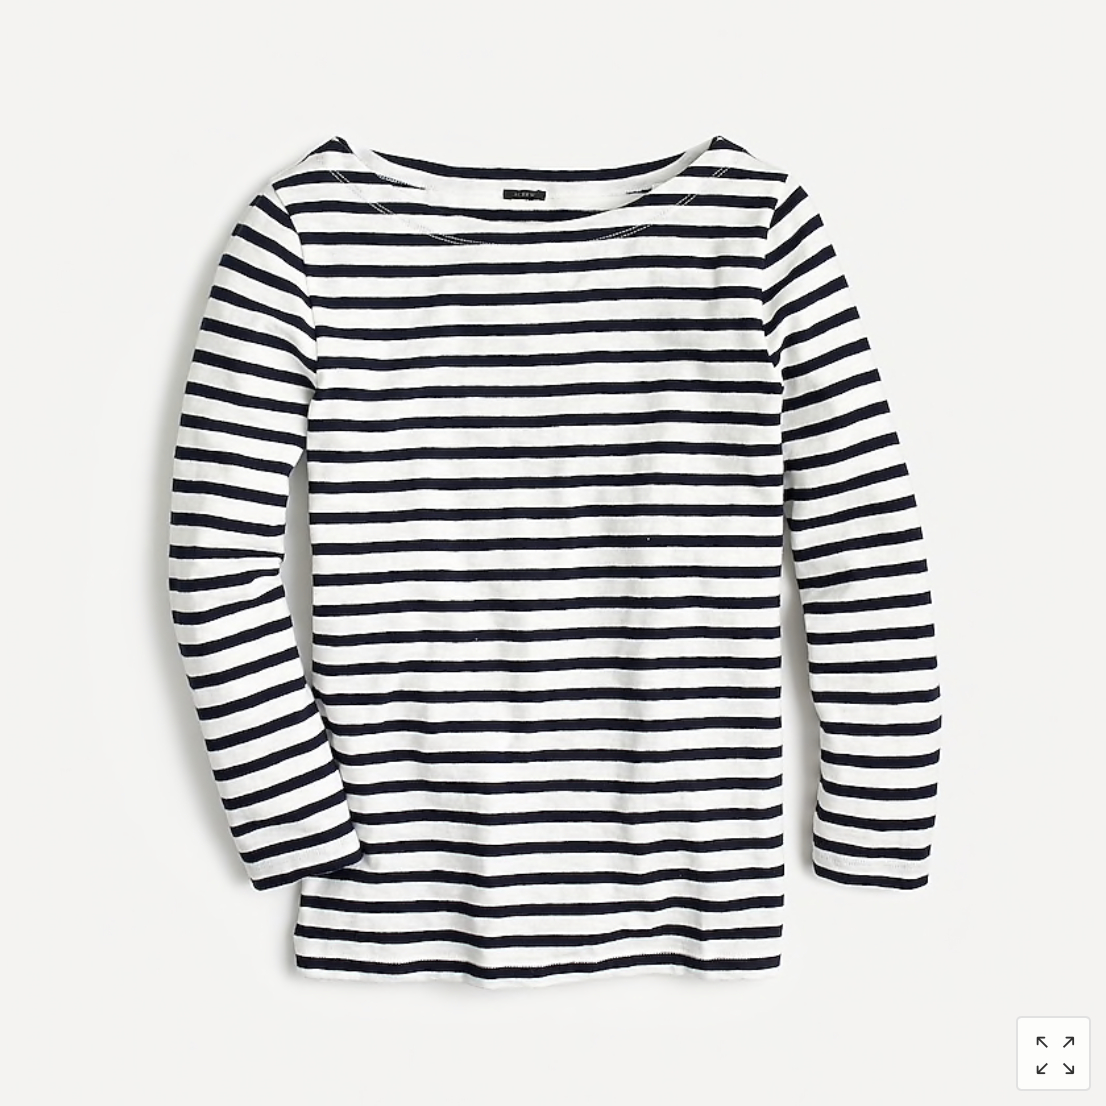 J.Crew Black Friday Sale 50% Off Early Access | Kelly in the City